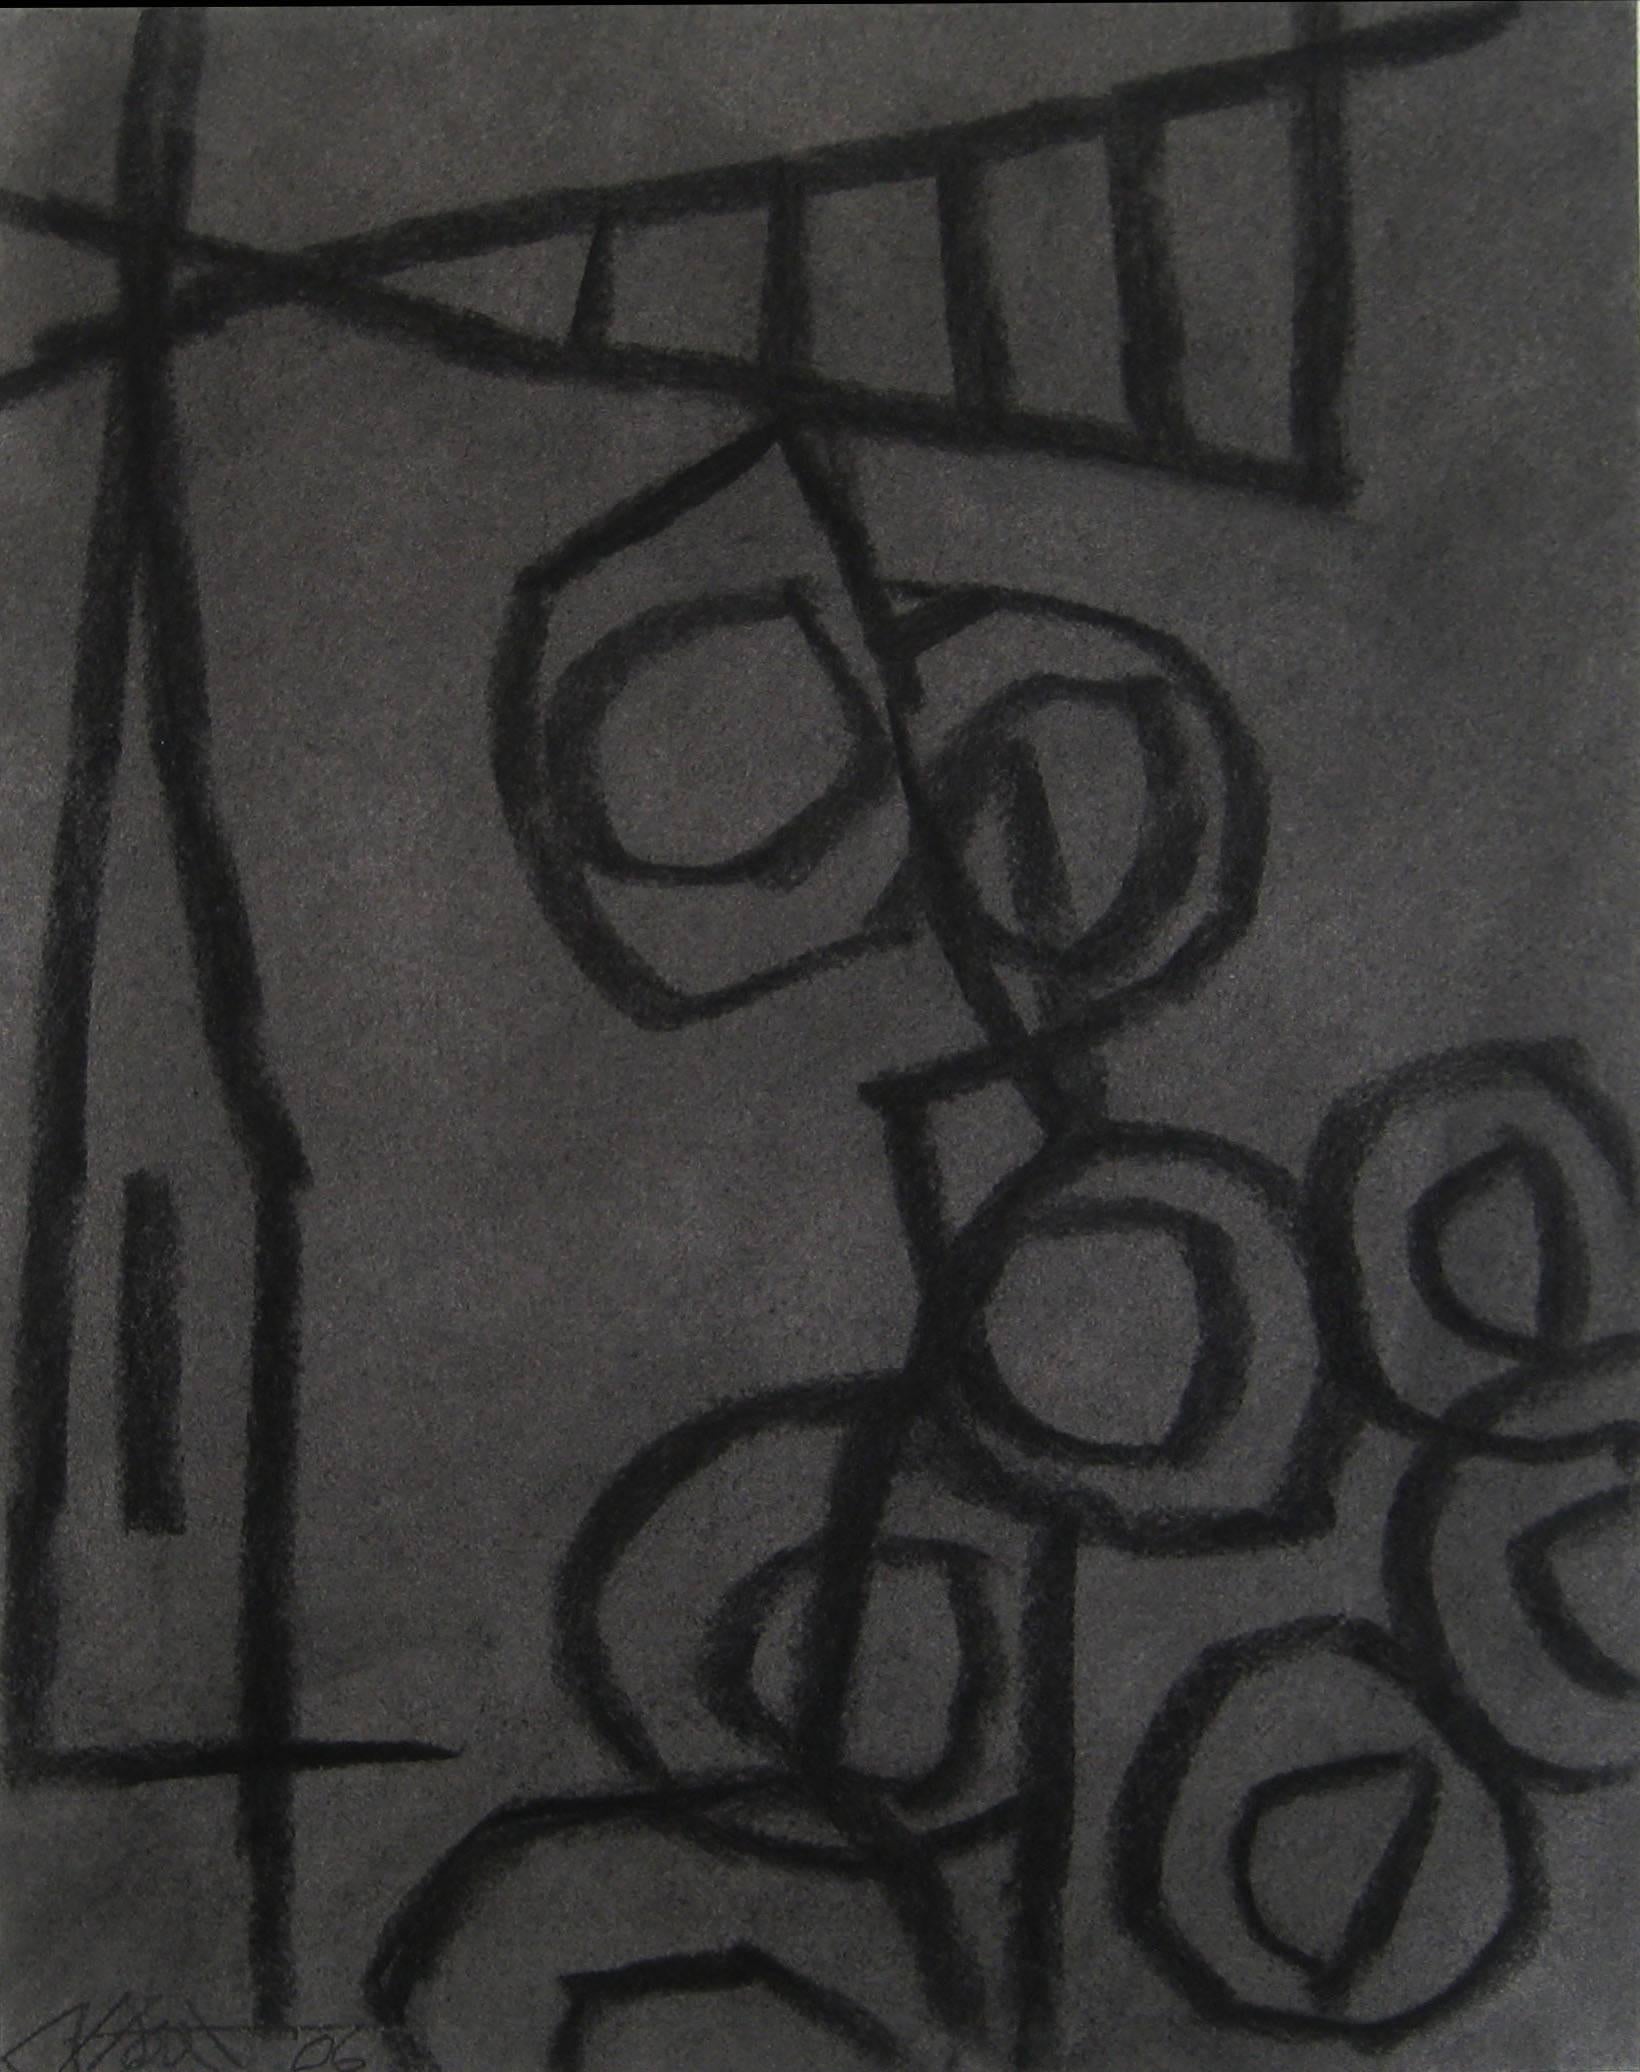 Untitled 24 (Modern Black Charcoal & Gray Abstract Still Life Drawing on Paper)